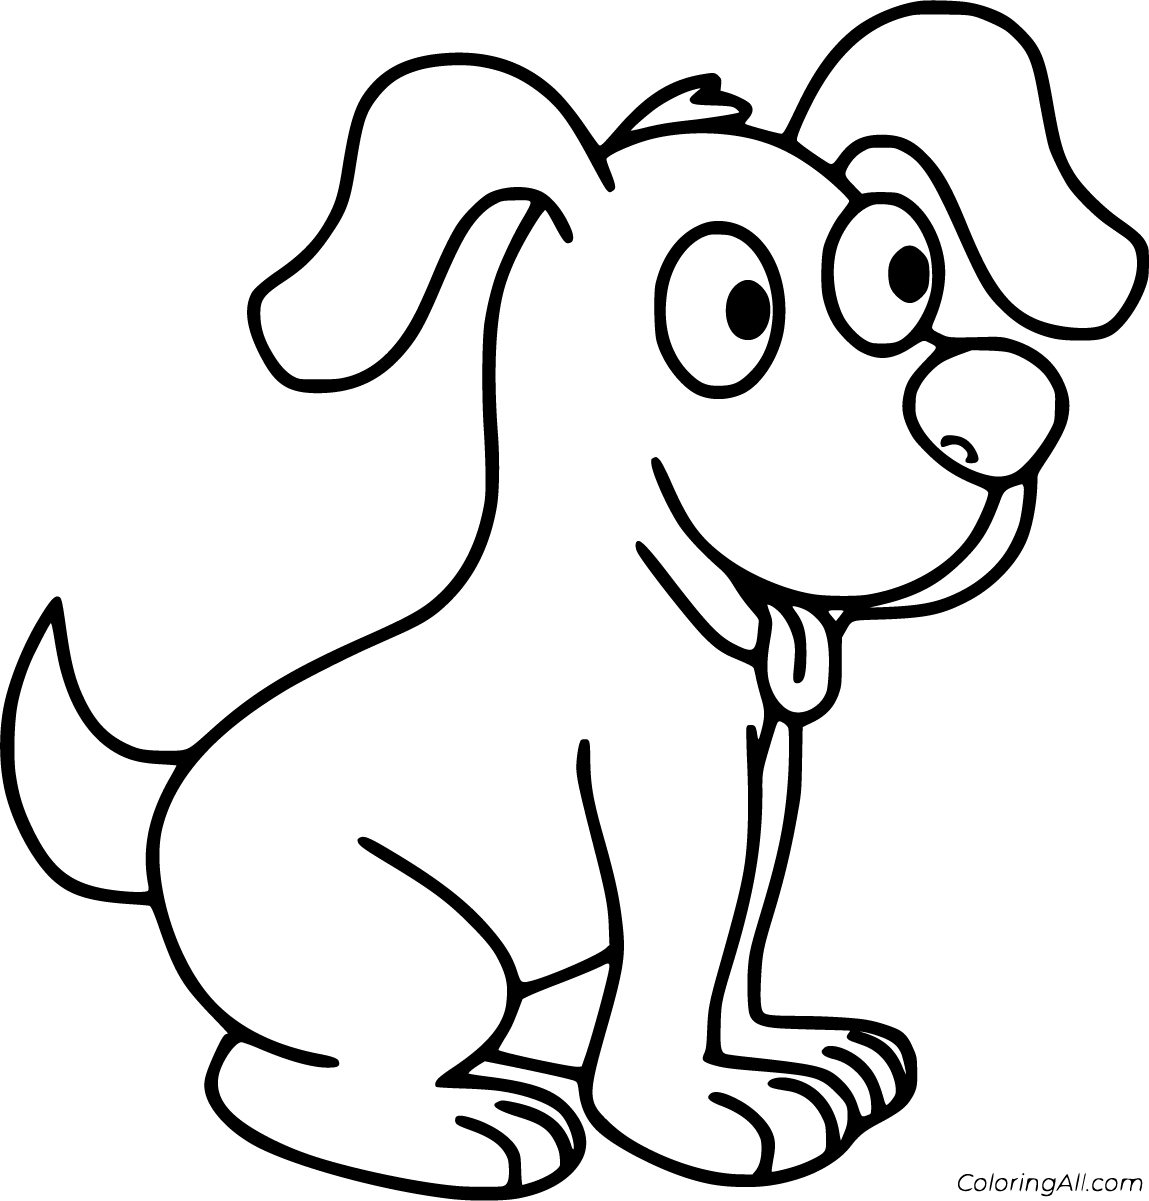 Puppy Coloring Pages (58 Free Printables) - ColoringAll